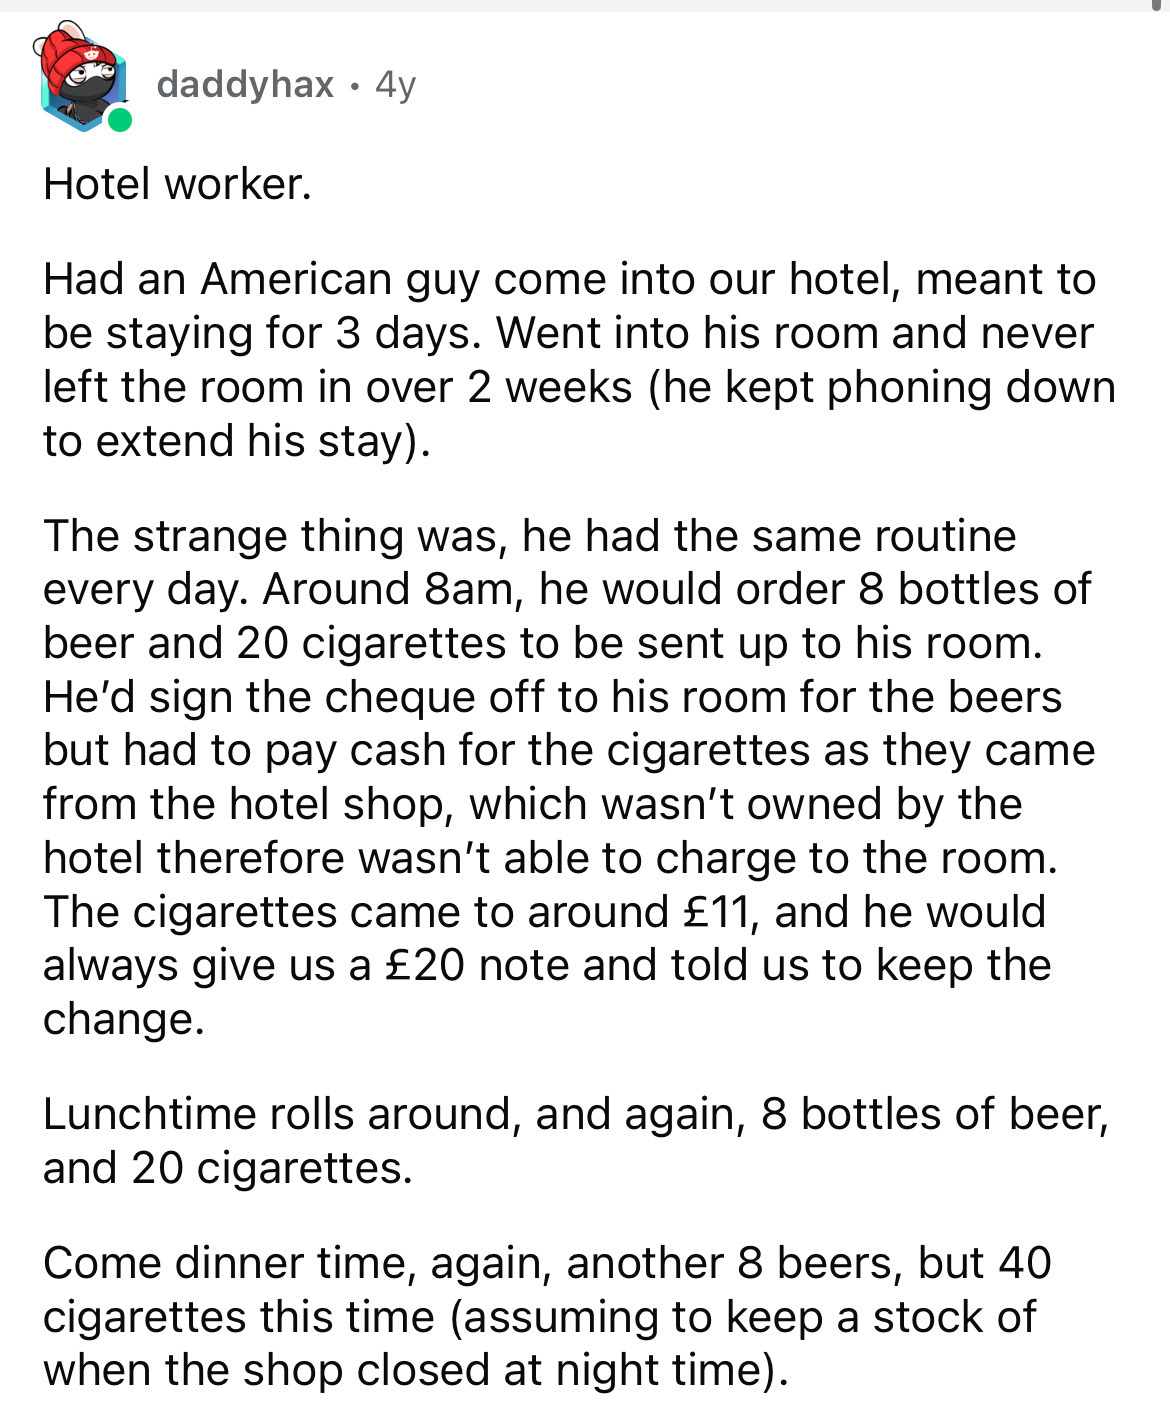 document - daddyhax 4y Hotel worker. Had an American guy come into our hotel, meant to be staying for 3 days. Went into his room and never left the room in over 2 weeks he kept phoning down to extend his stay. The strange thing was, he had the same routin